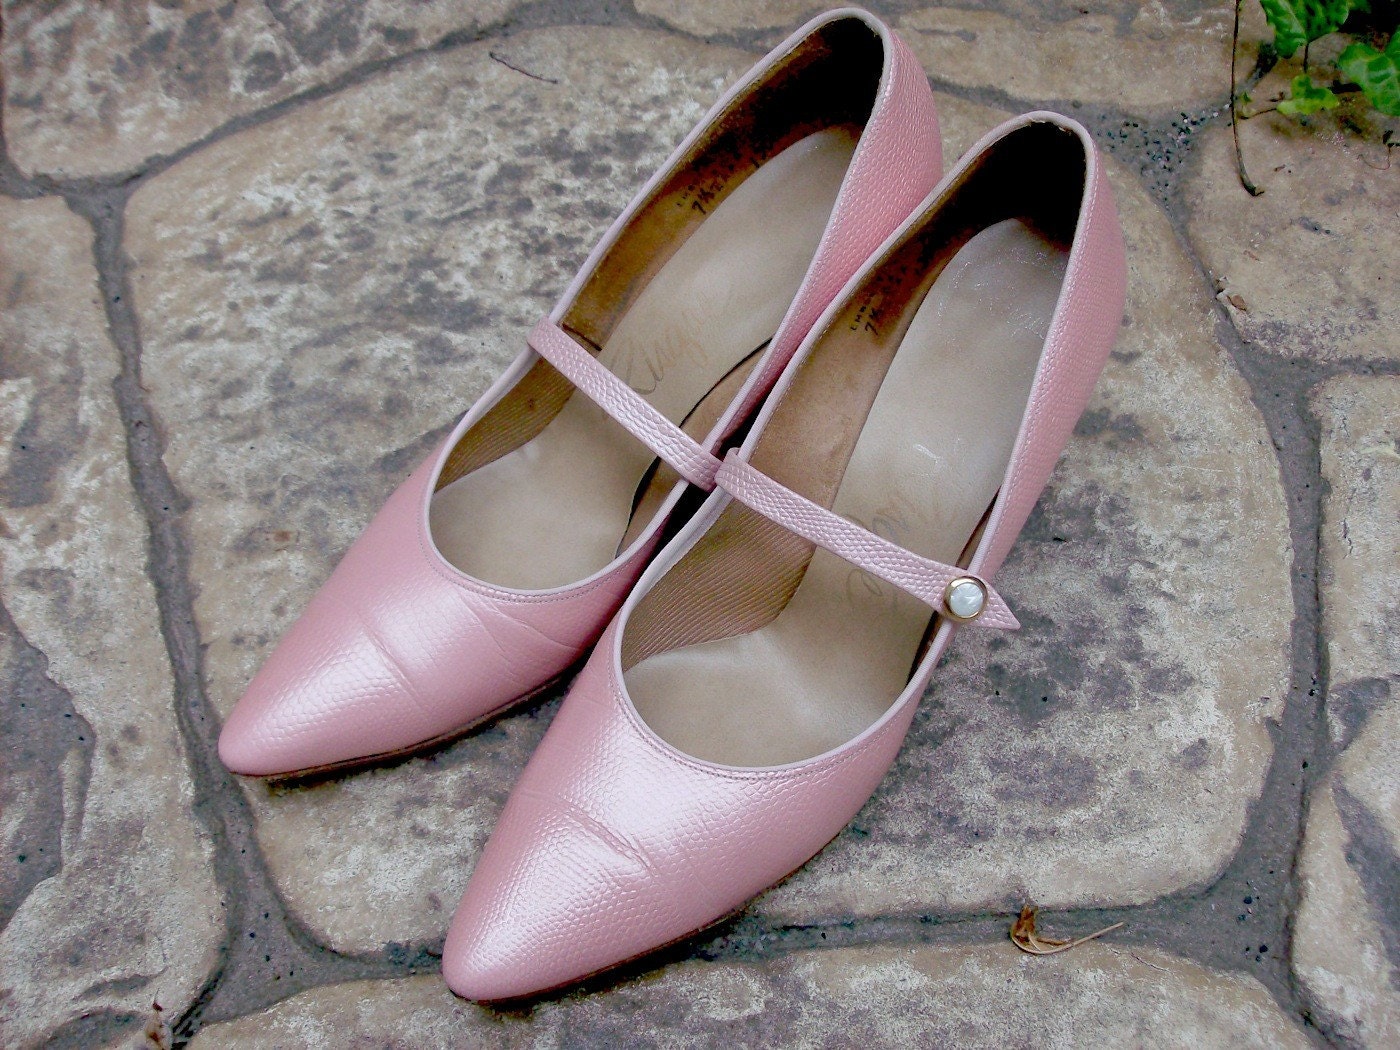 VINTAGE 50s 60s PINK PUMPS - PEARLIZED LIZARD EMBOSSED LEATHER HIGH HEELS - Size 6, 6 1/2, 6.5